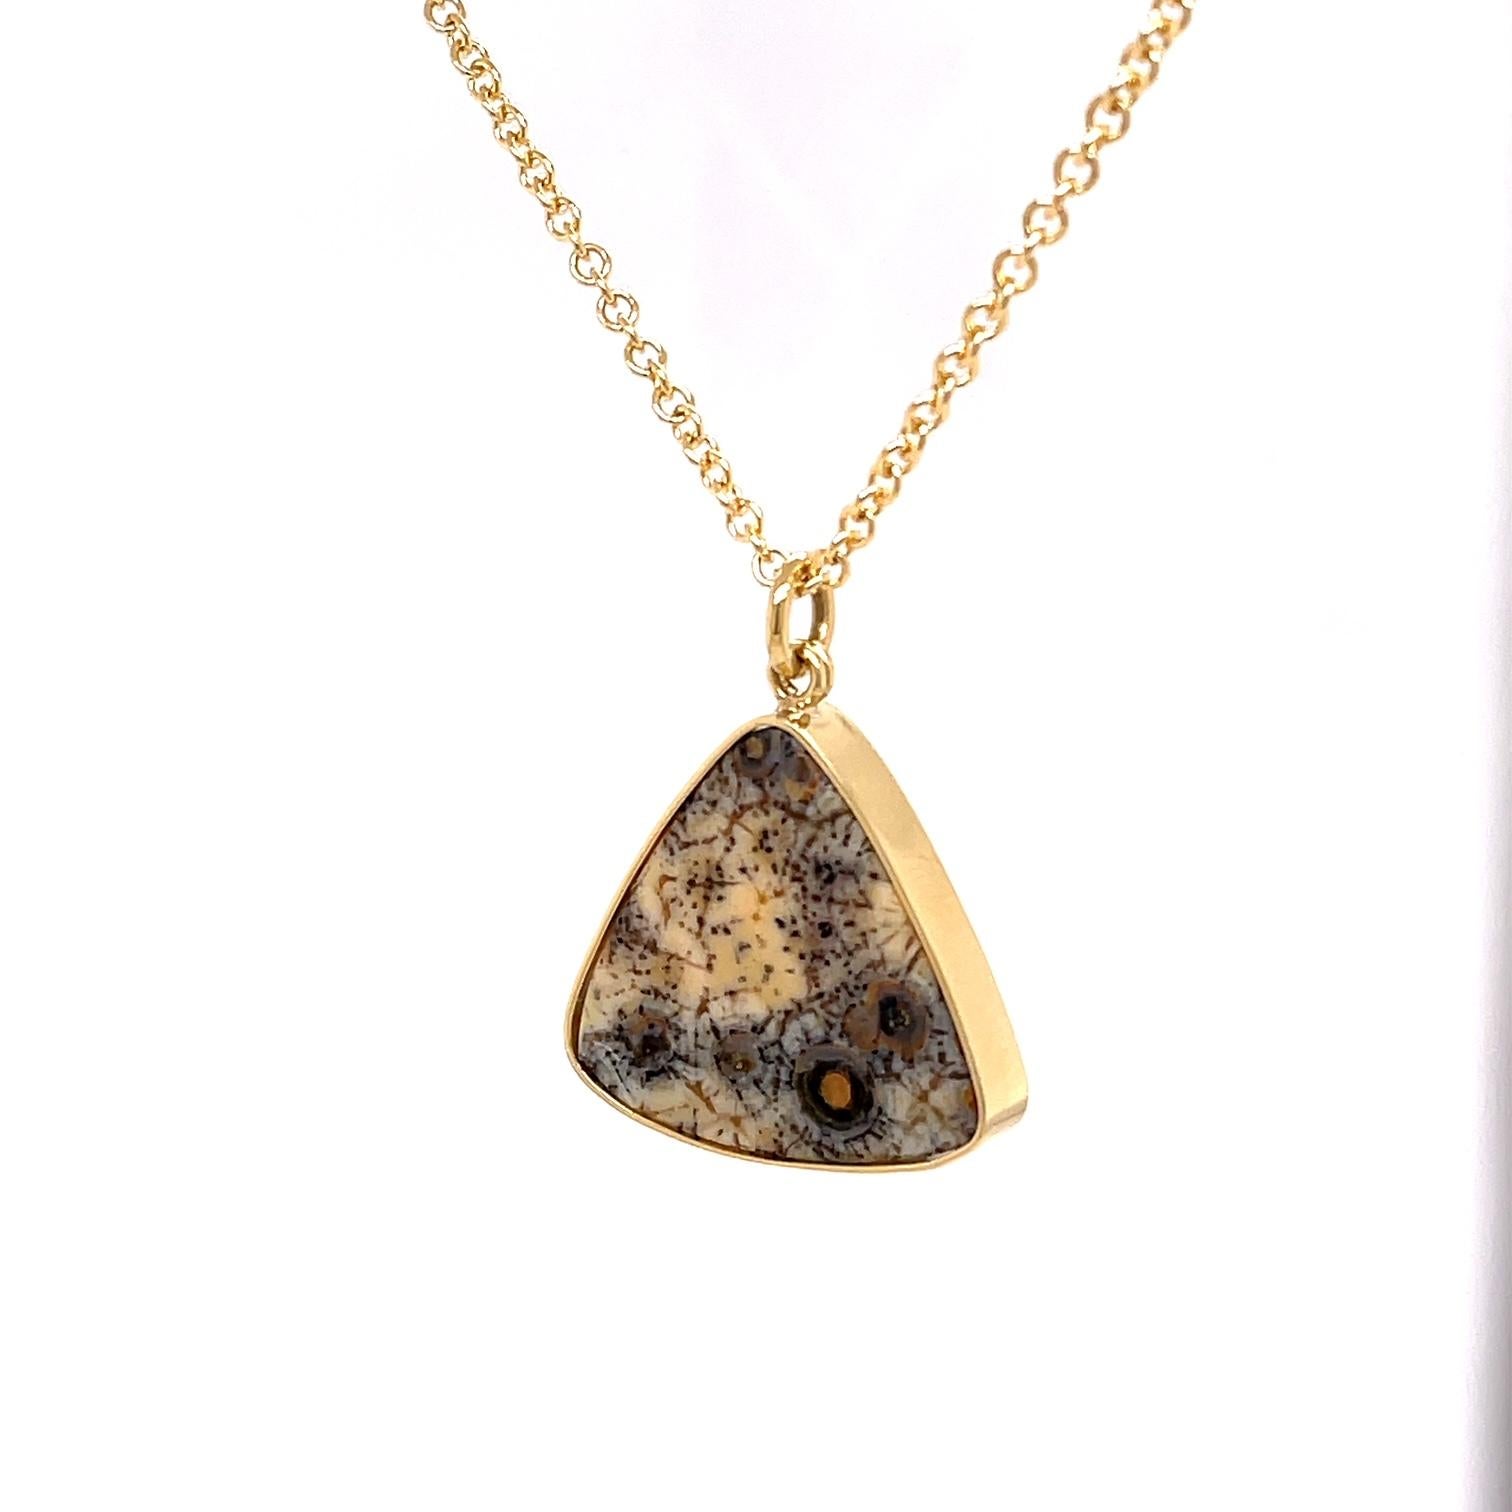 Contemporary 18k Yellow Gold Triangular Druzy Pendant with a 14k Yellow Gold Cable Chain